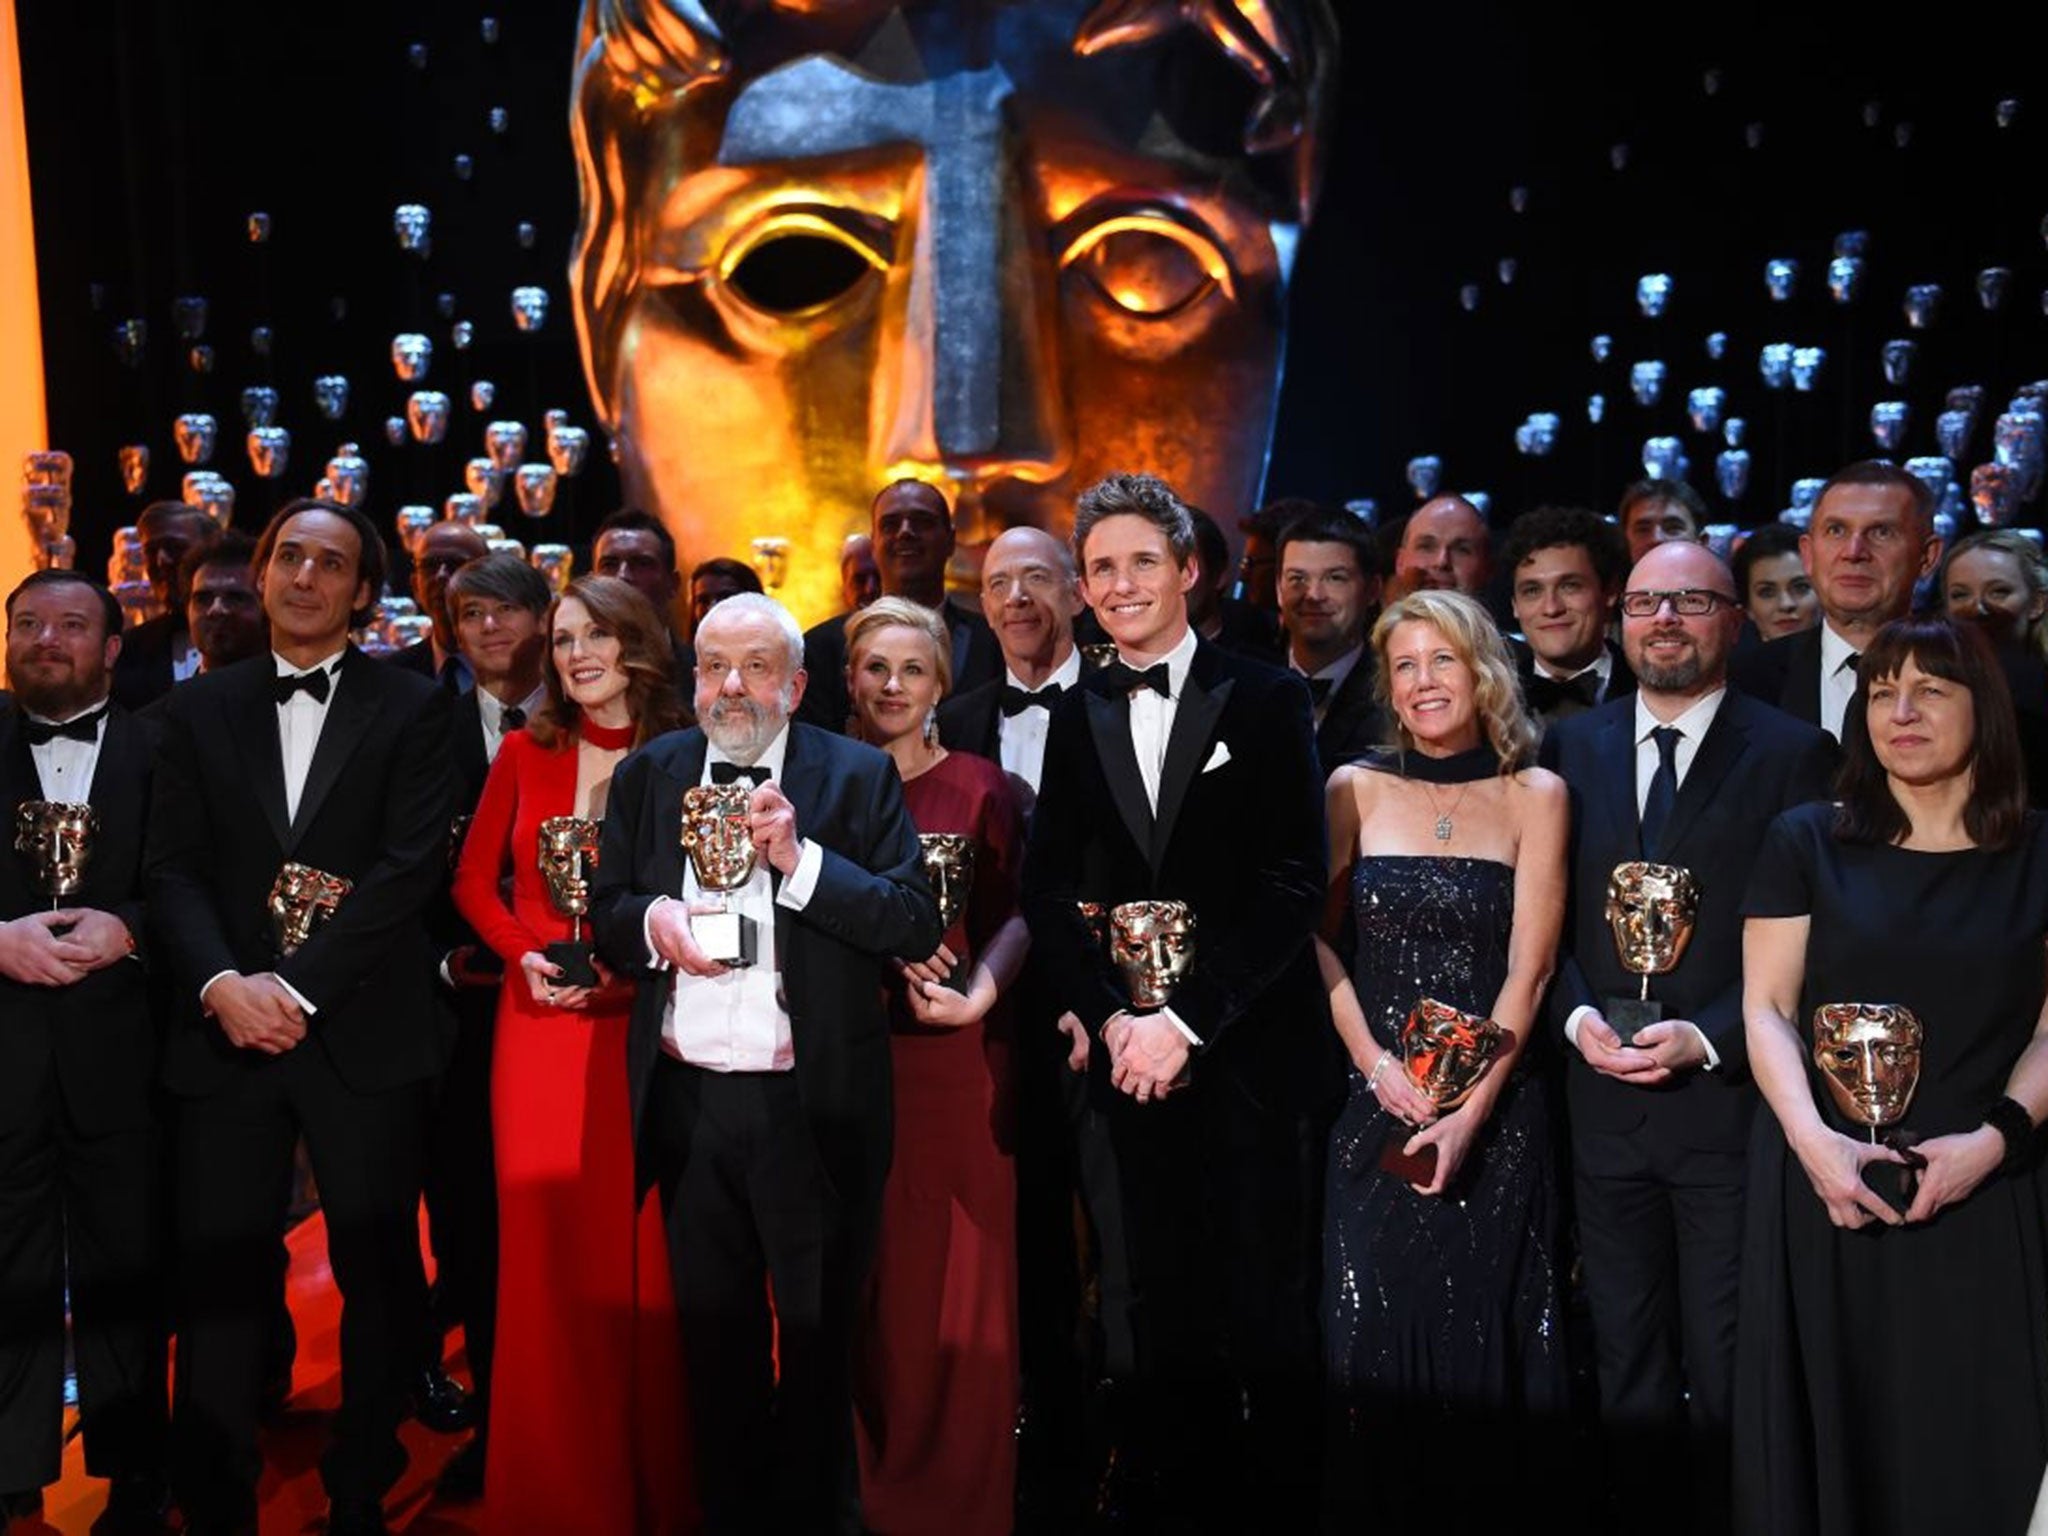 Winners pose on the stage during the Baftas